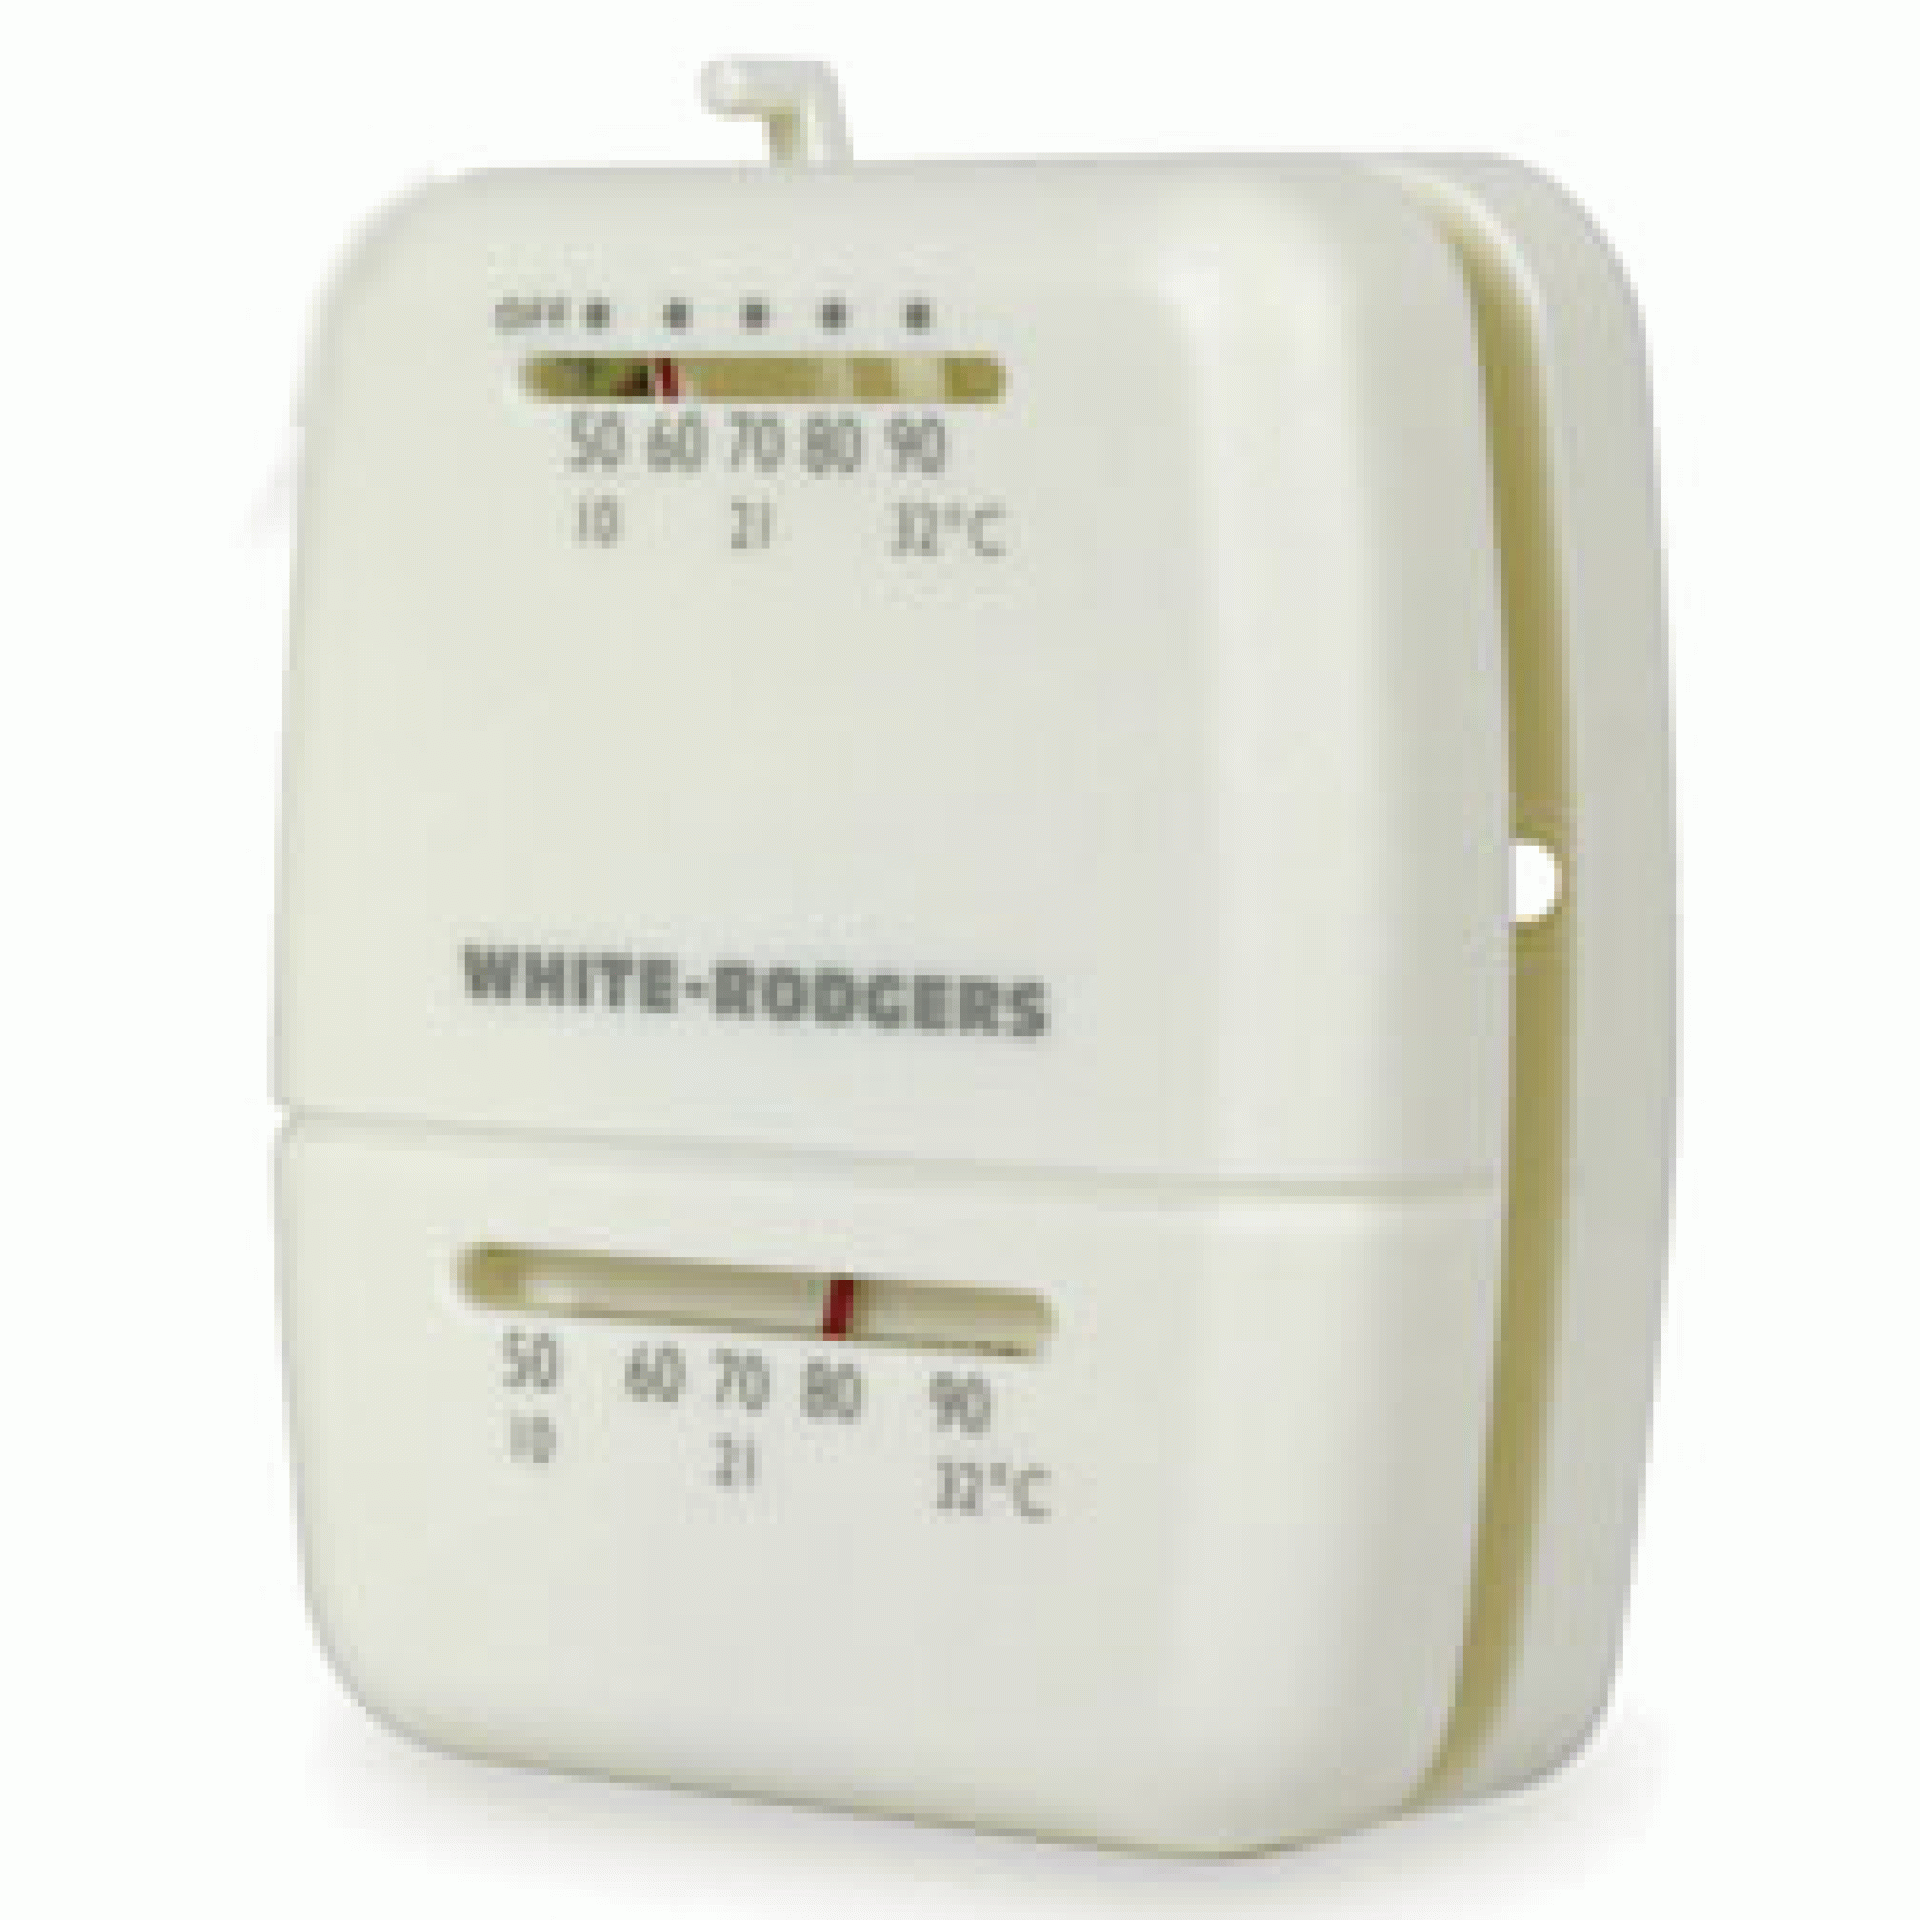 CAMCO MFG INC | 09231 | Wall THERMOSTAT - HEAT ONLY - Beige